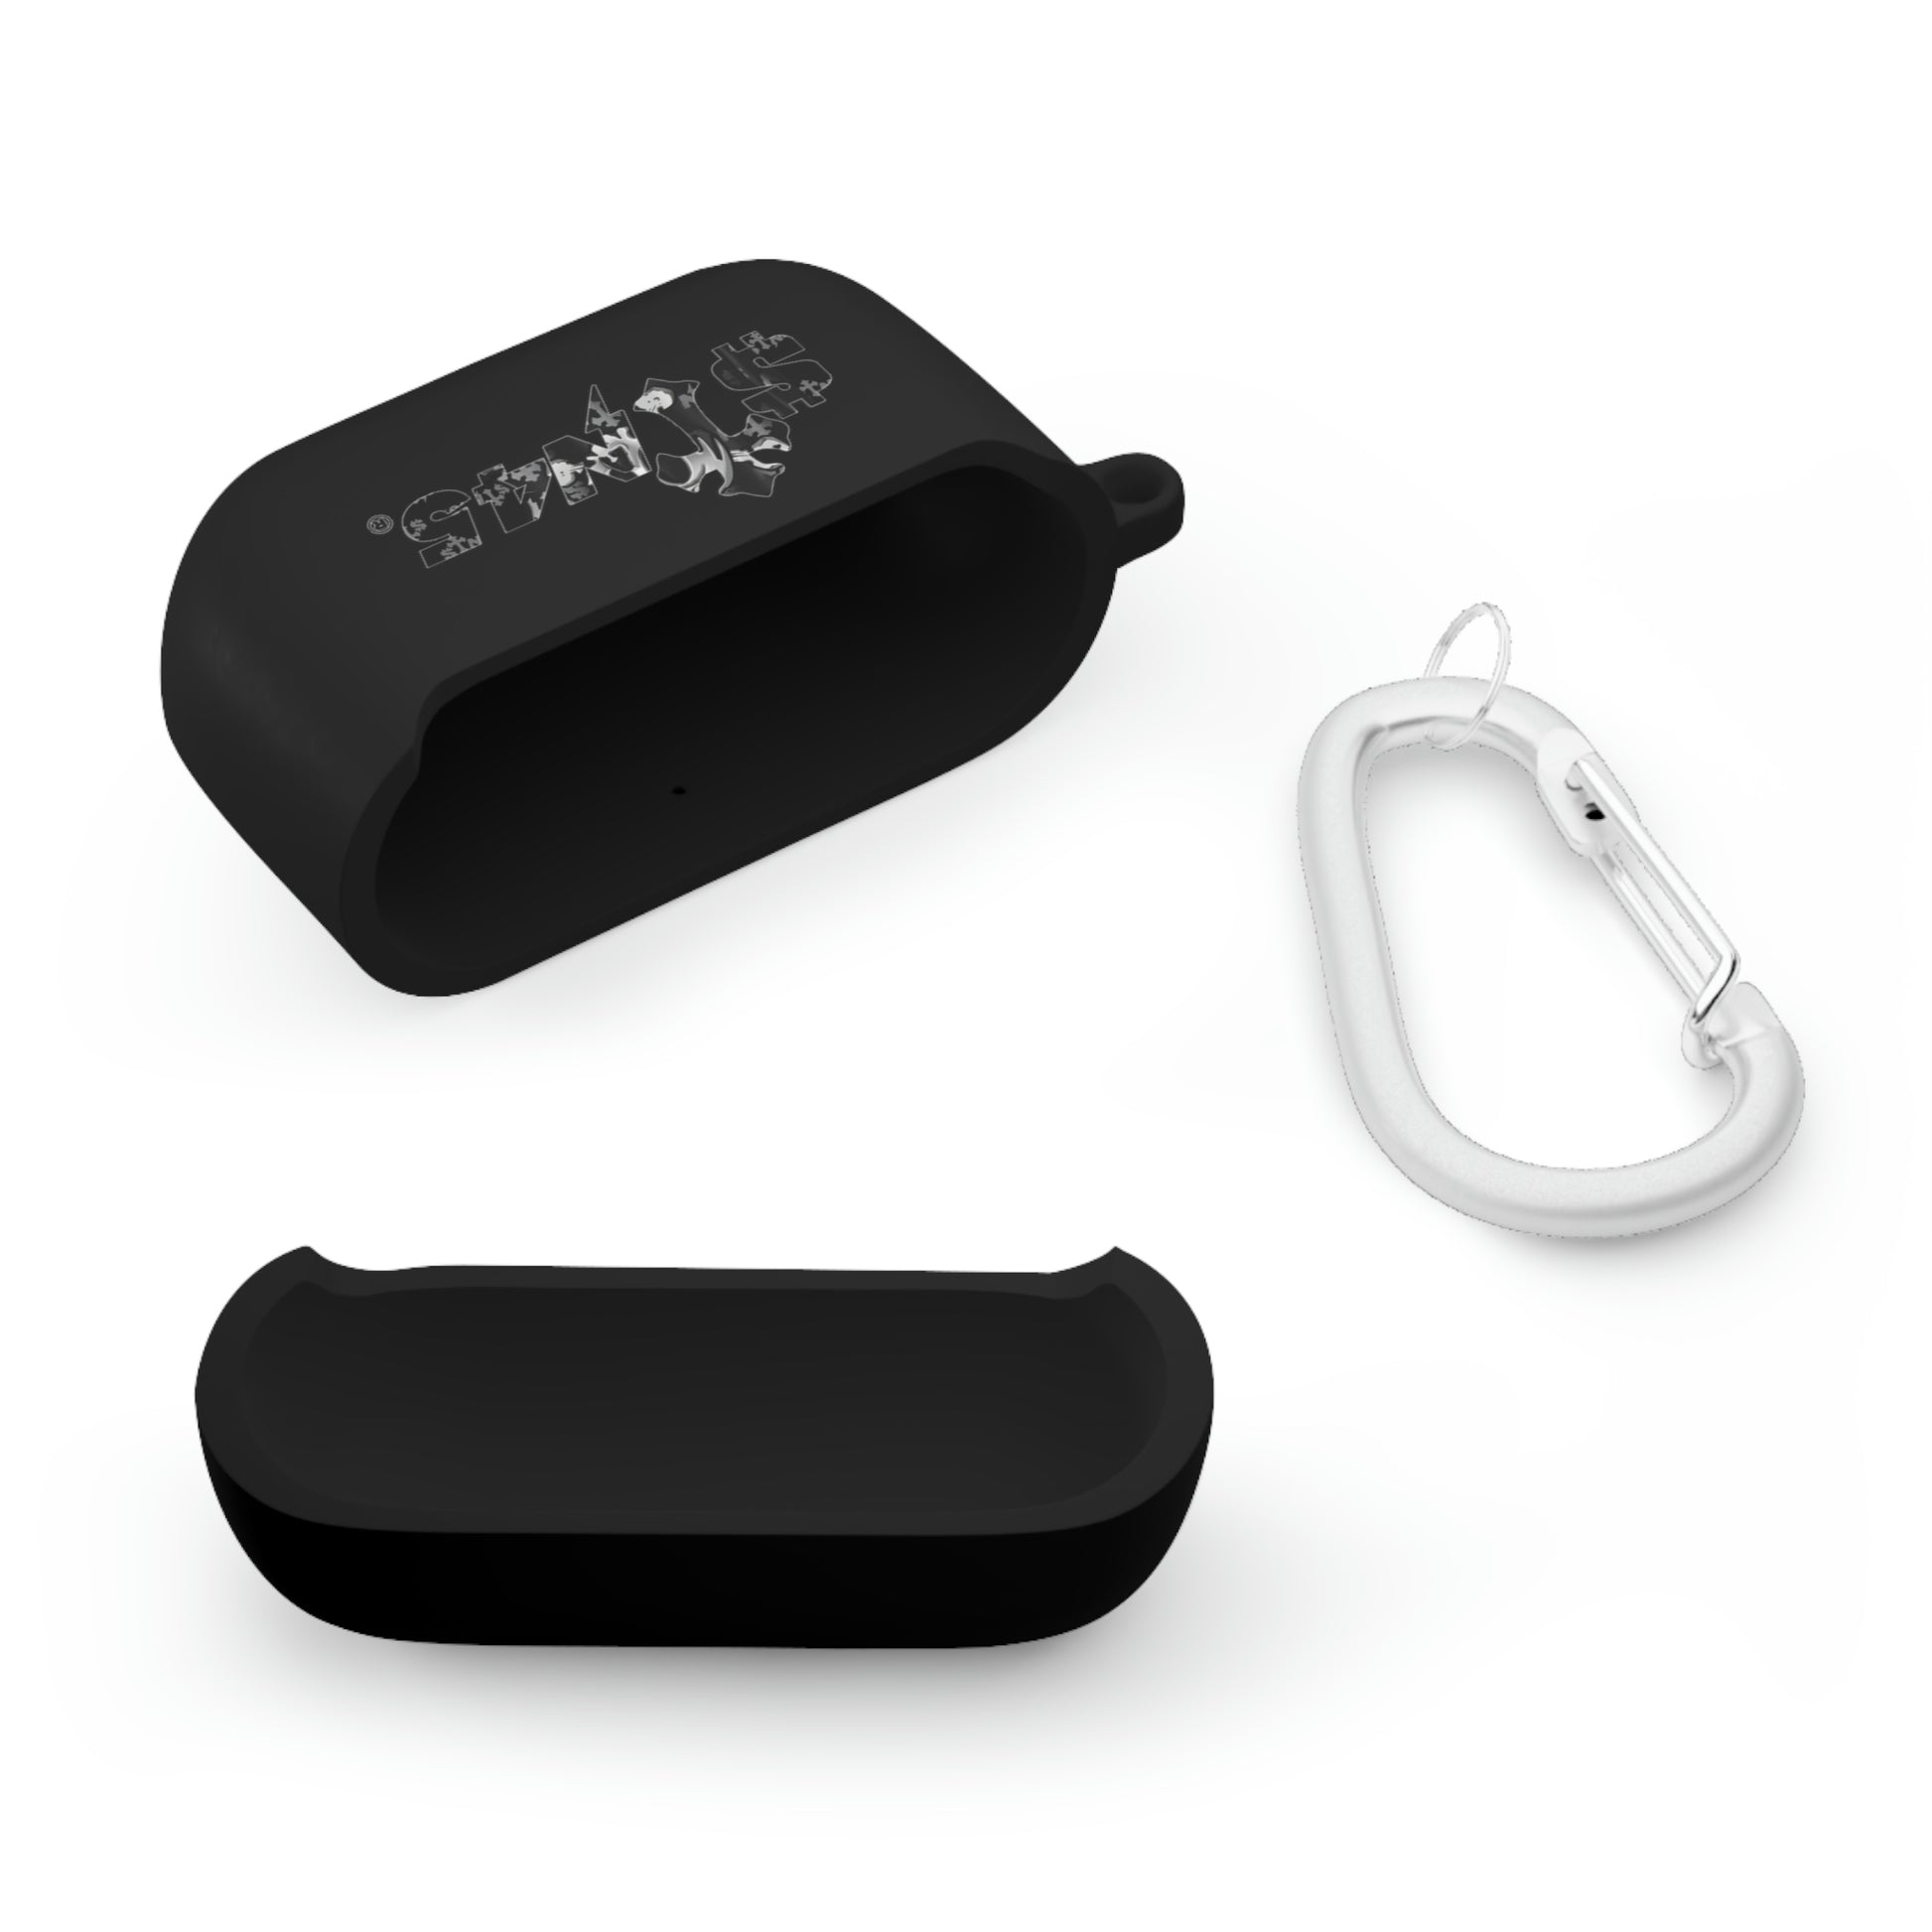 Onn. Charging Case Cover for Apple AirPods Pro & Similar Charging Cases, Black